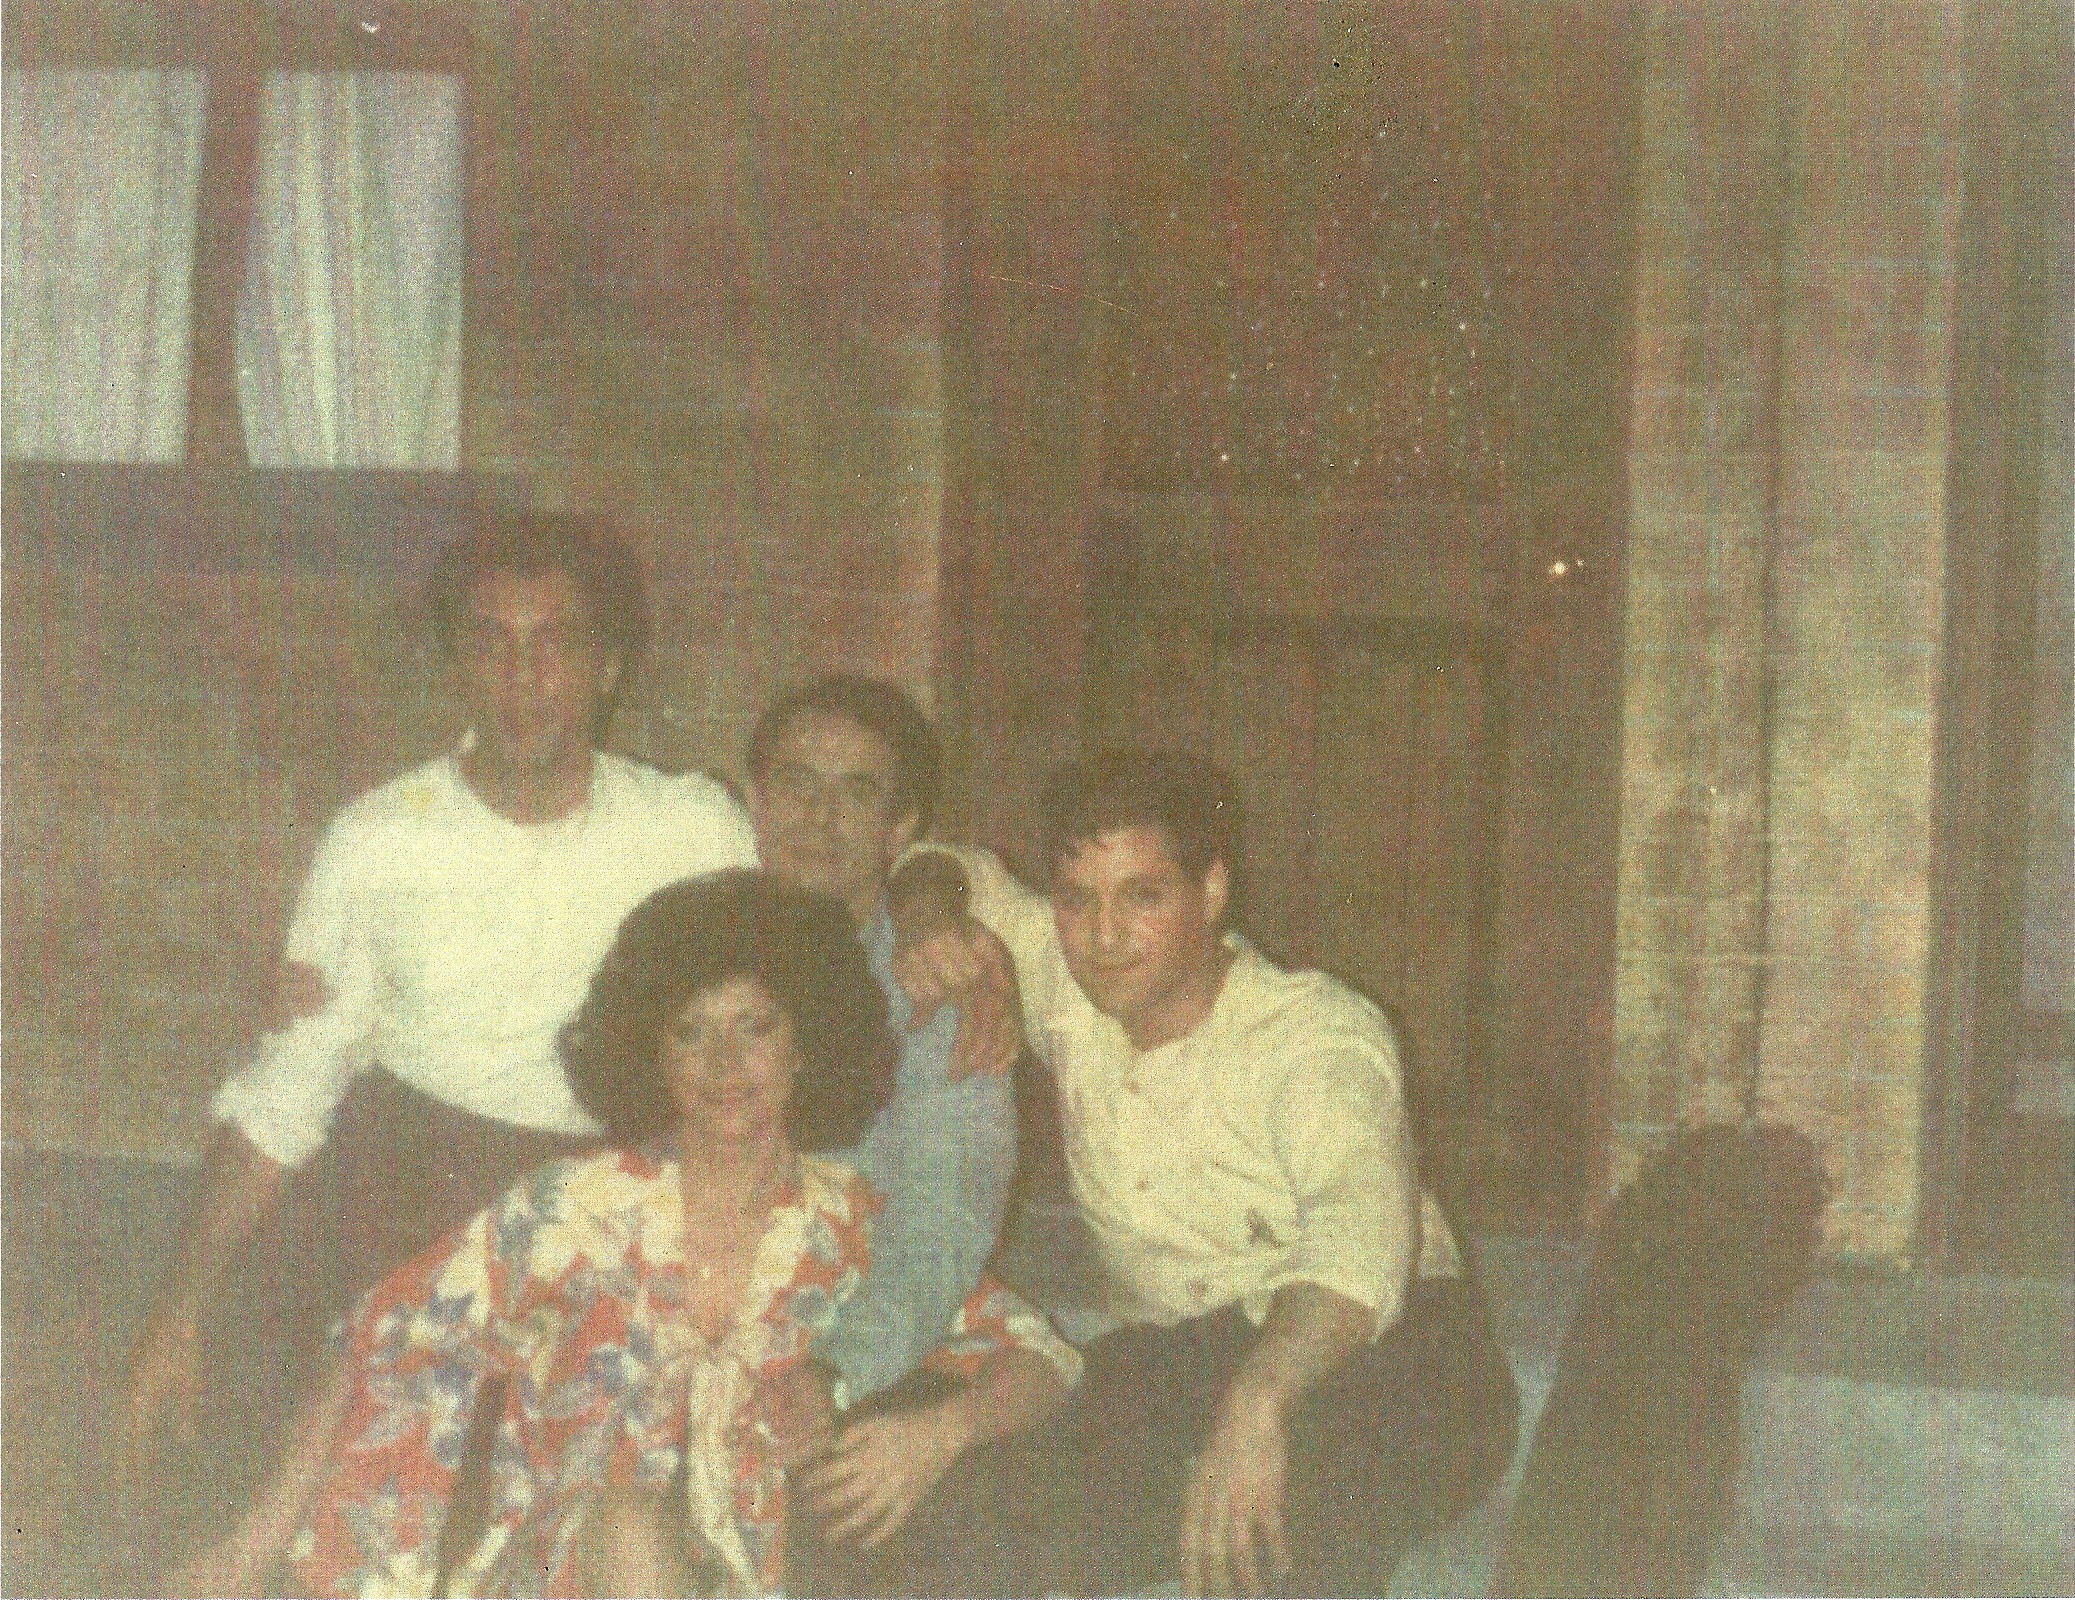 Richard D'Alessandro (far left) as Bonzey in a Production of Lou LaRusso's 